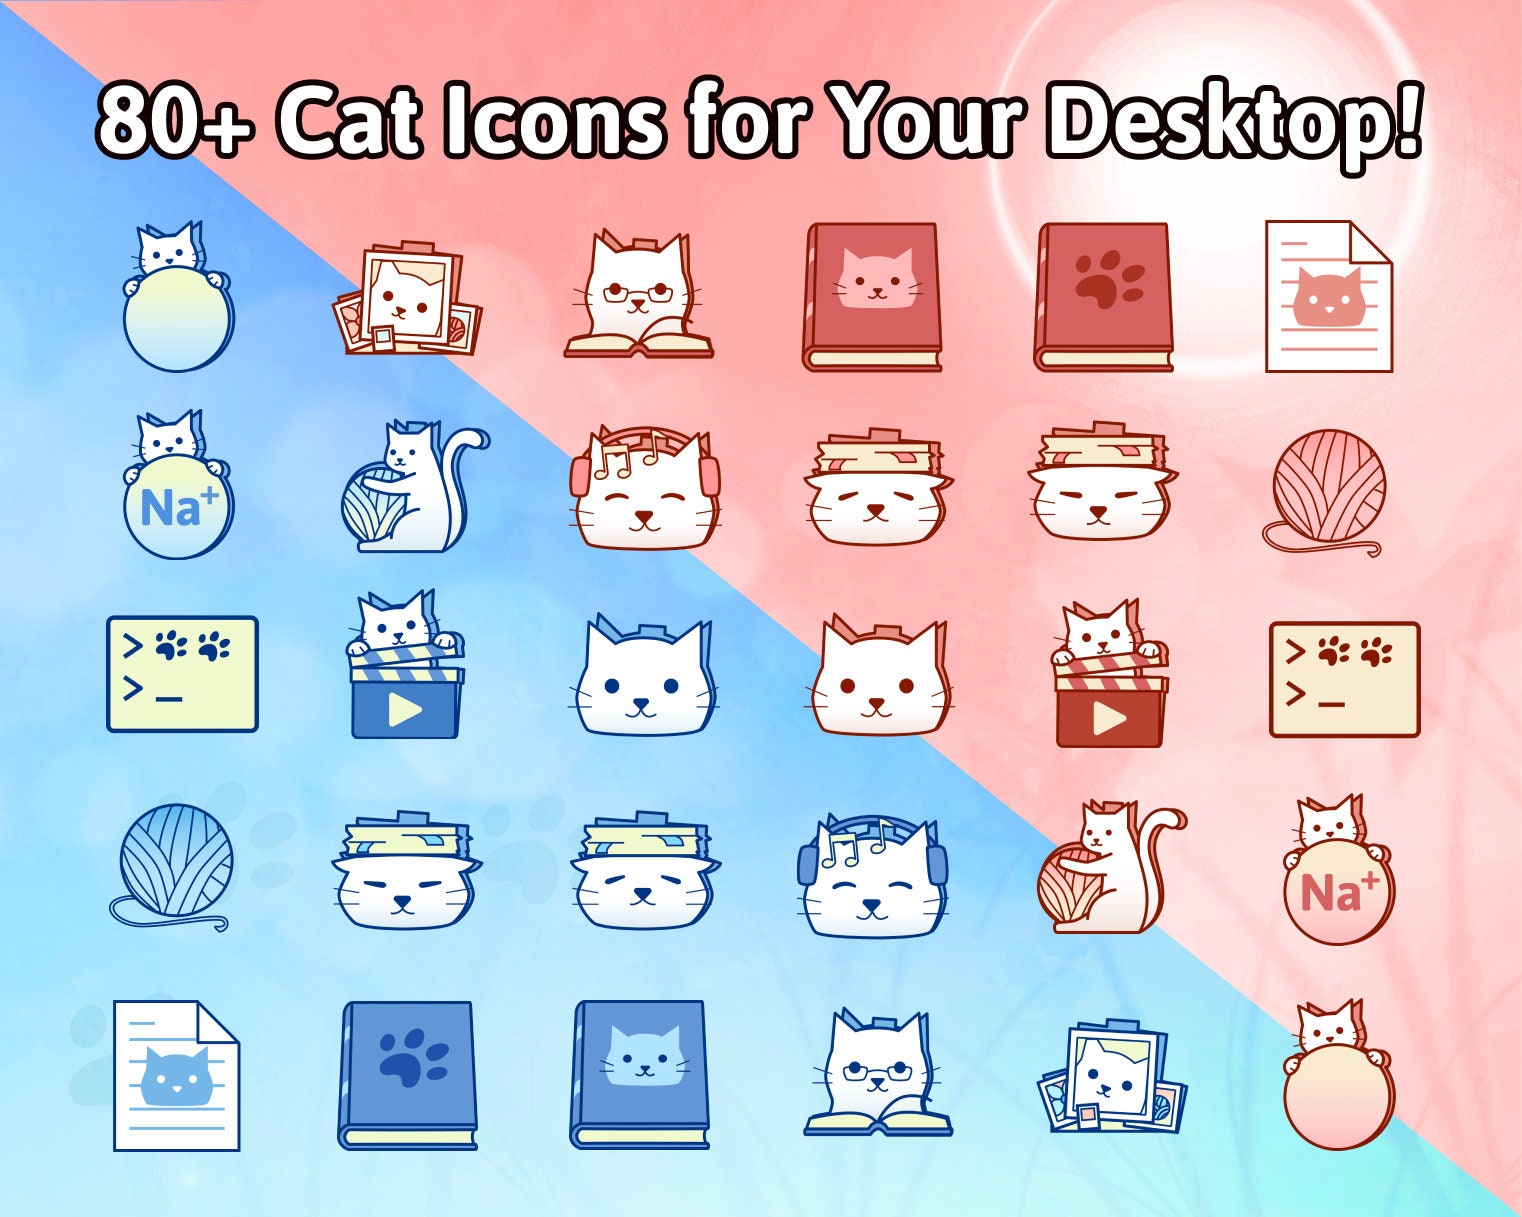 icons, headers, etc. — cat icons like/reblog if you use/save